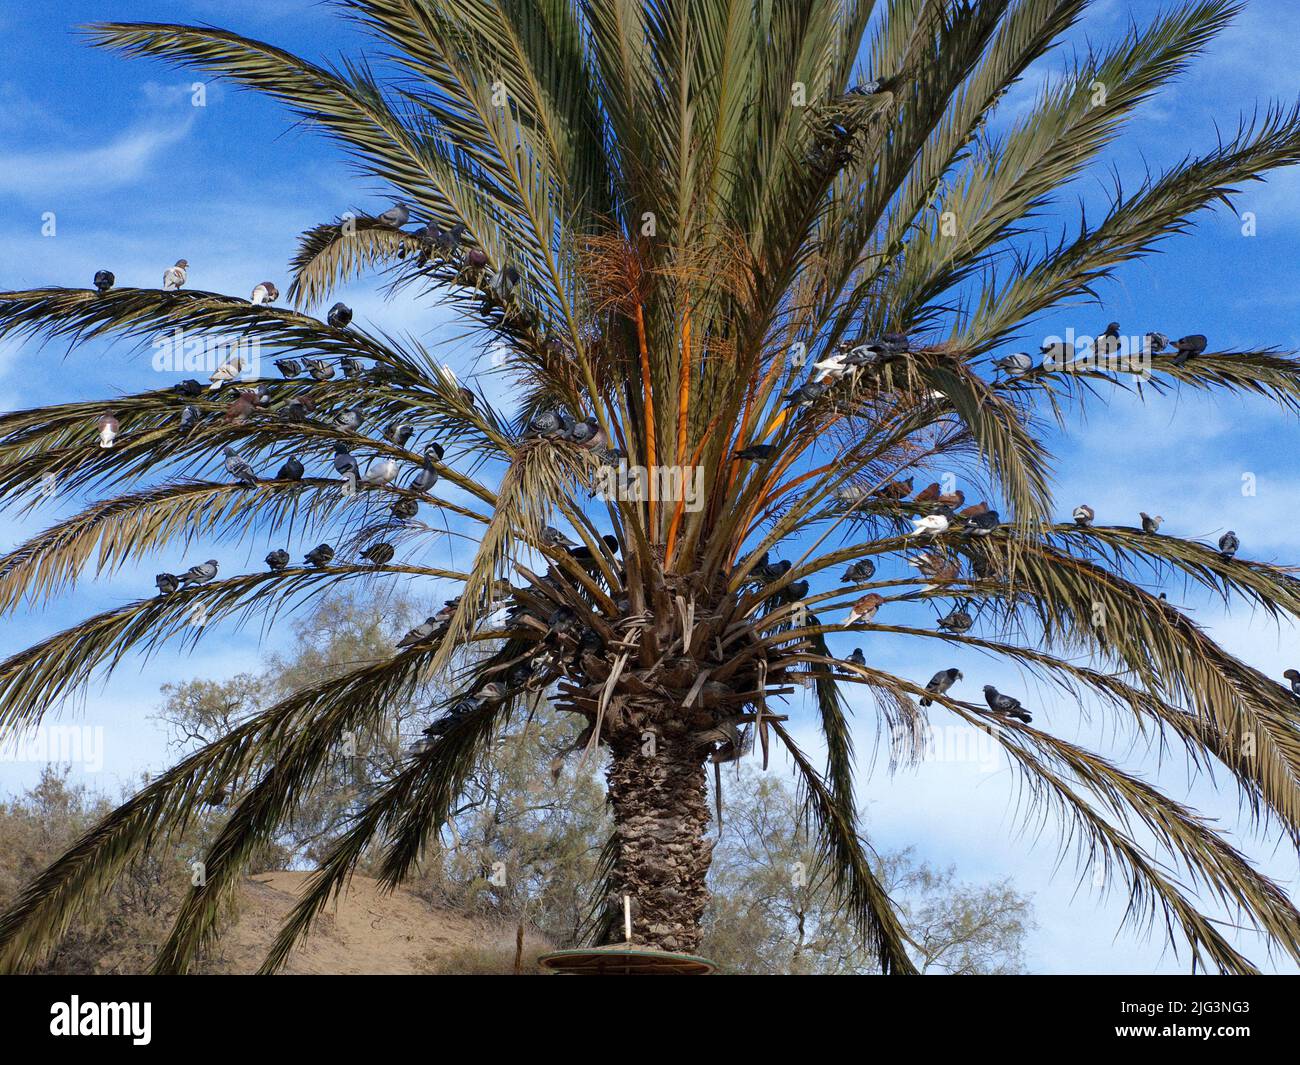 Pigeons sitting on a palm tree at the Camel station close the dunes of Maspalomas, Grand Canary, Canary islands, Spain, Europe Stock Photo